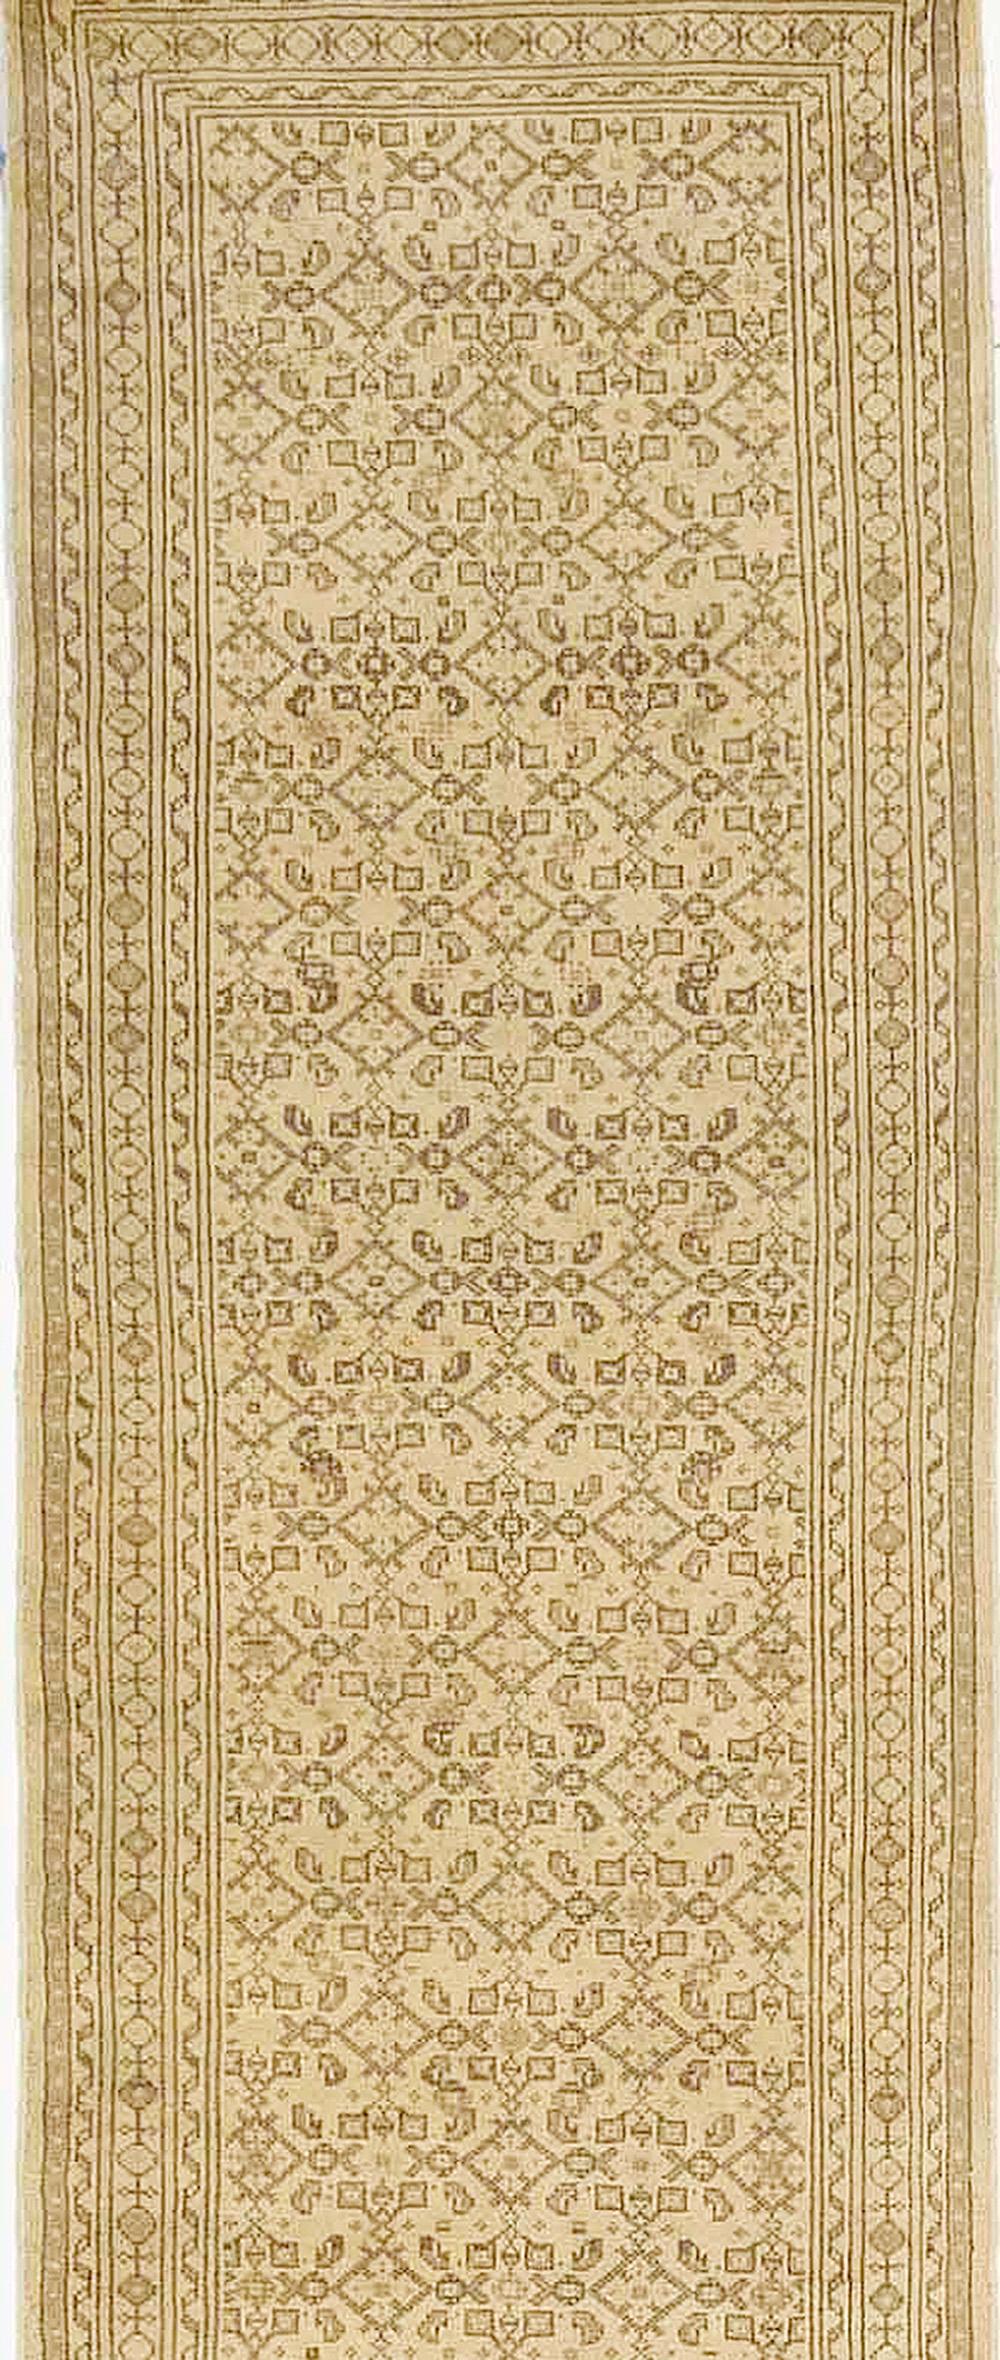 Hand-Woven Antique Persian Malayer Runner Rug with Beige & Brown Geometric Patterns For Sale